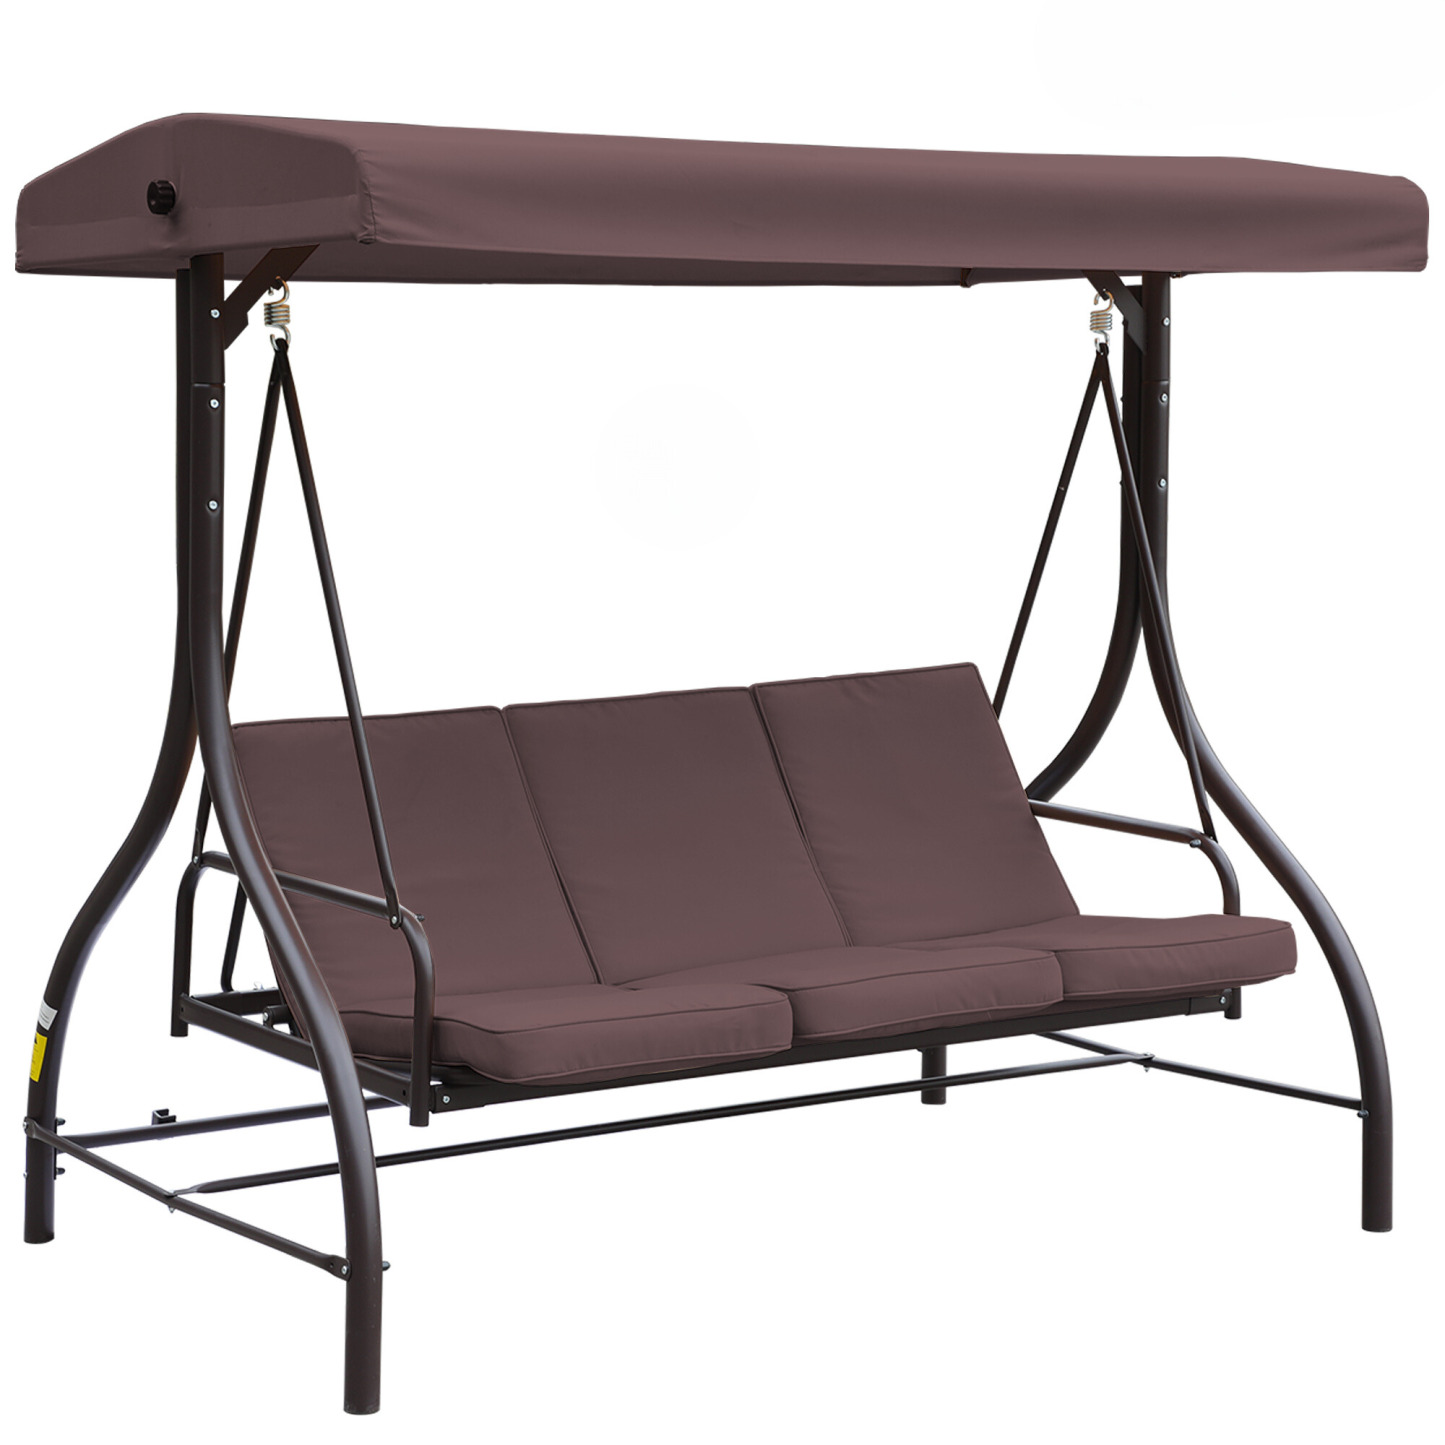 3-Seat Steel Outdoor Porch Swing Chair with Adjustable Canopy and Removable Cushions 